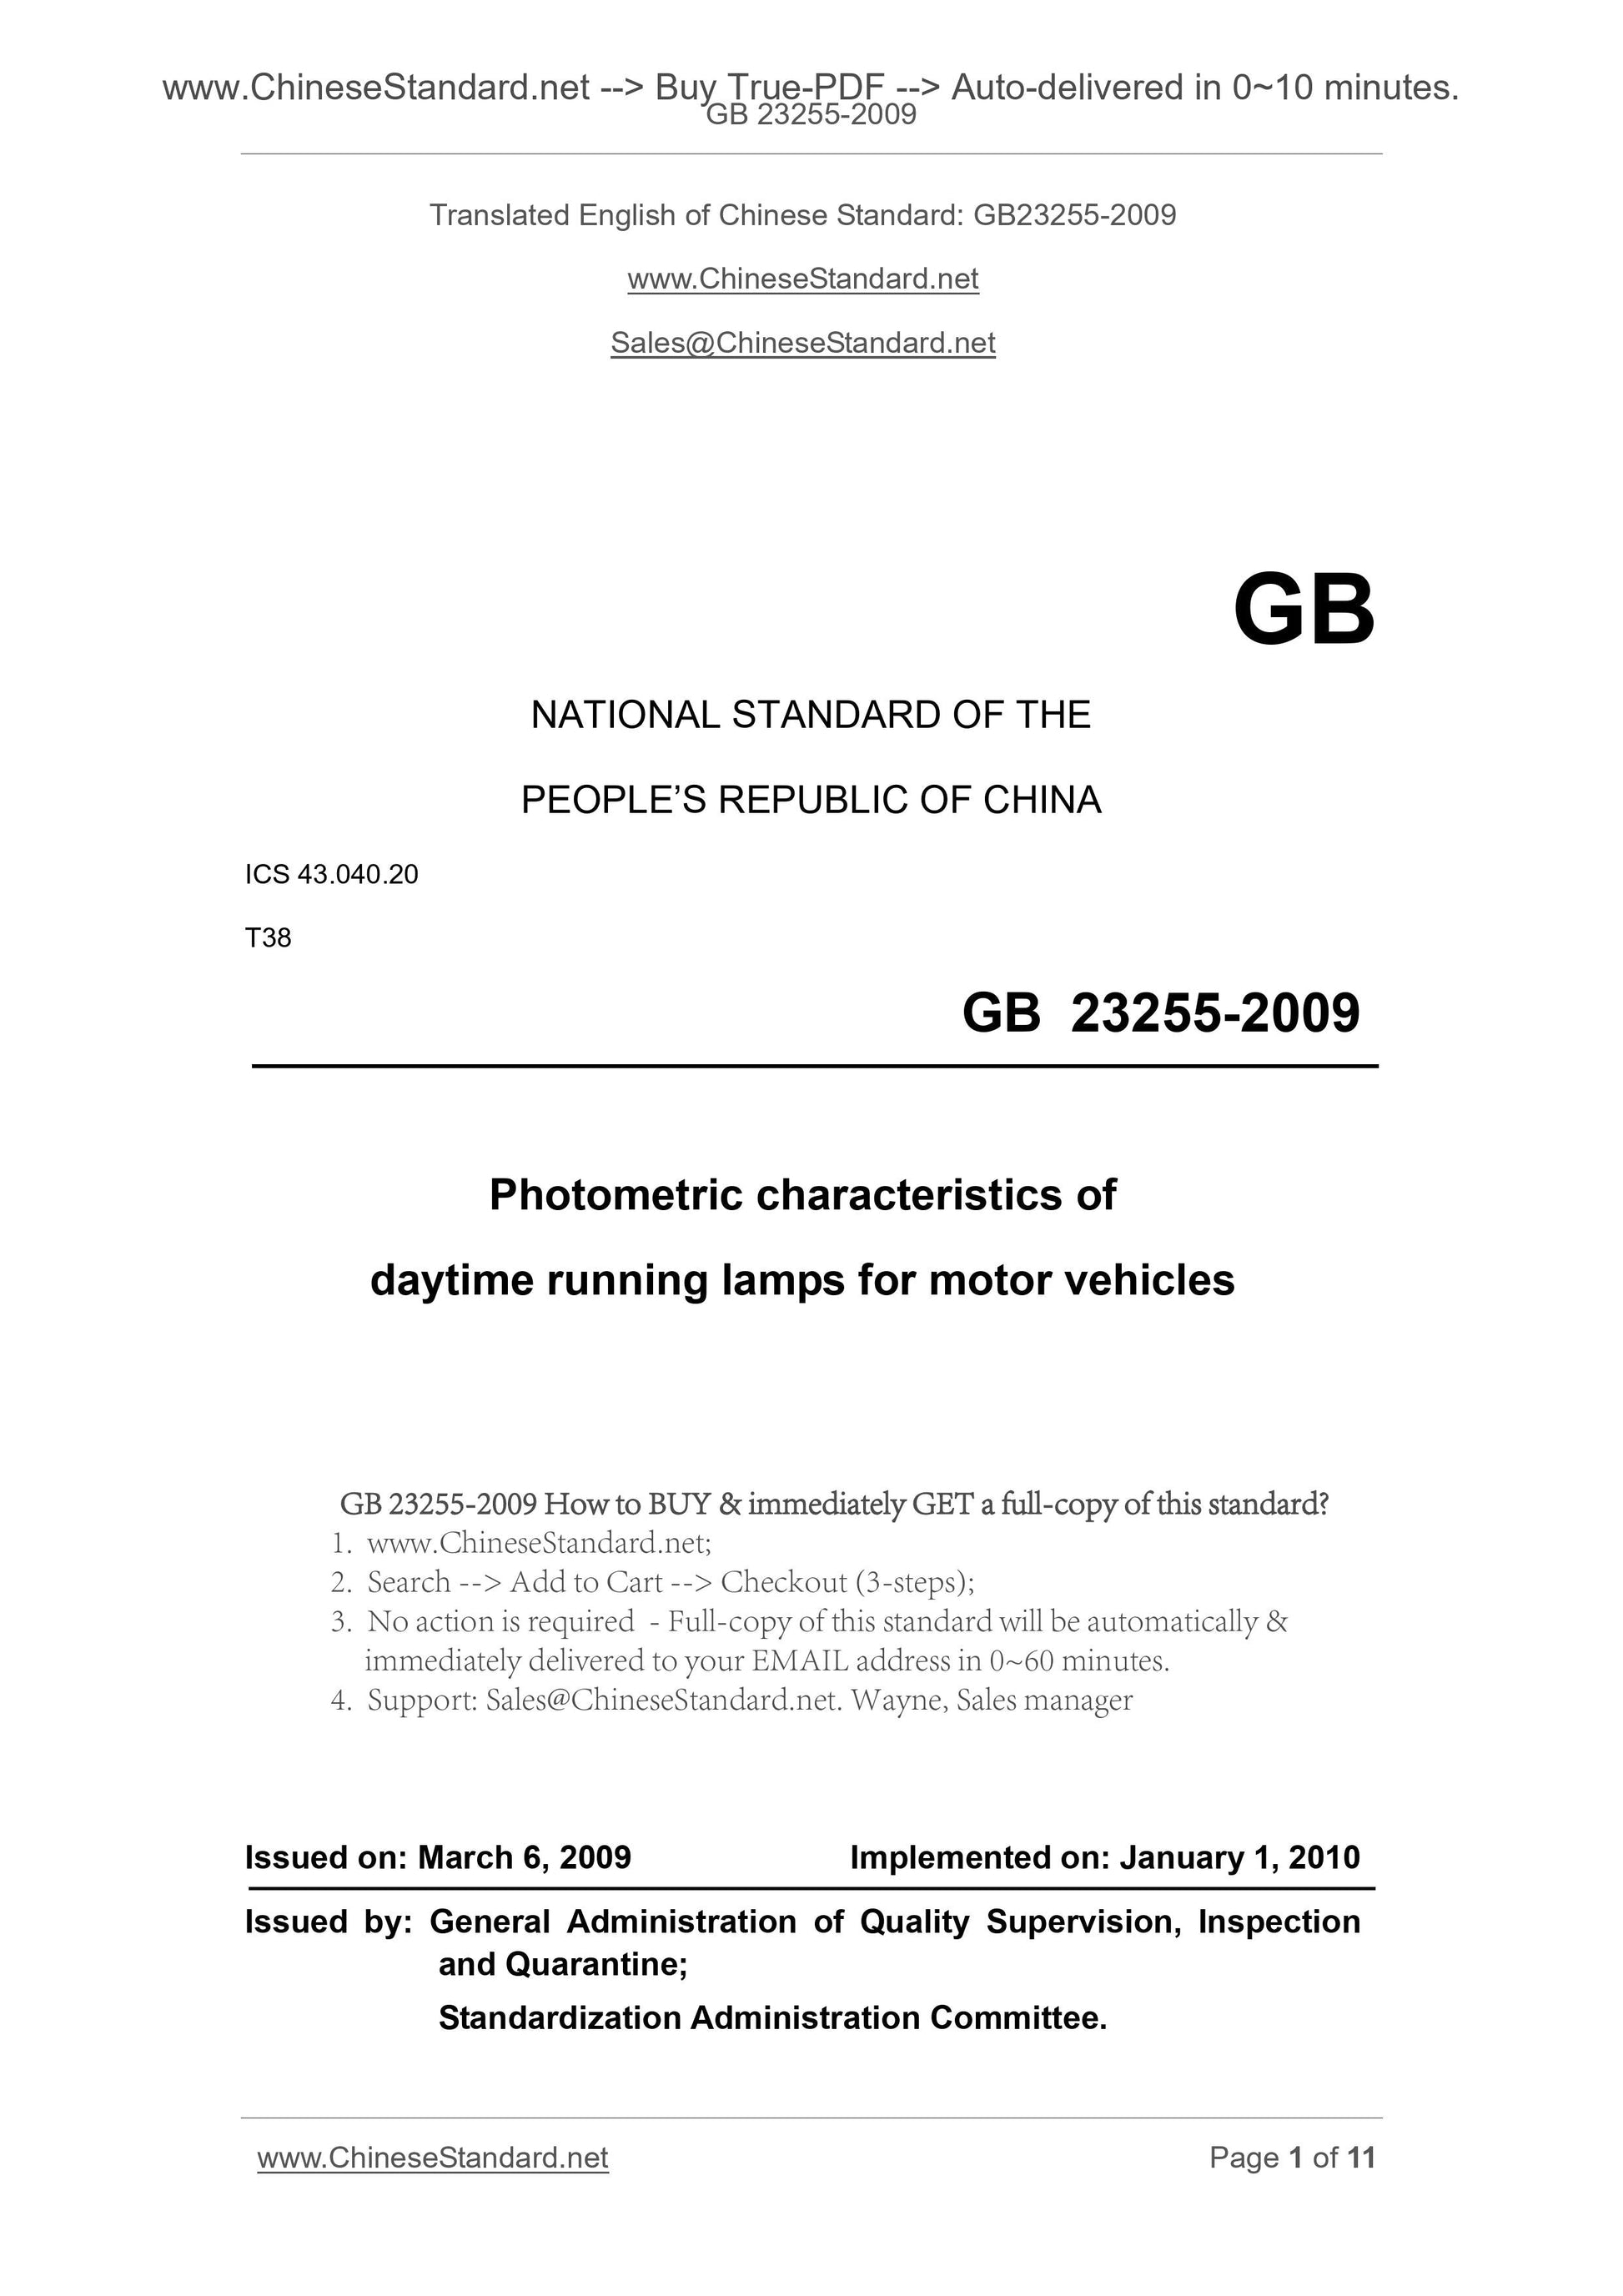 GB 23255-2009 Page 1